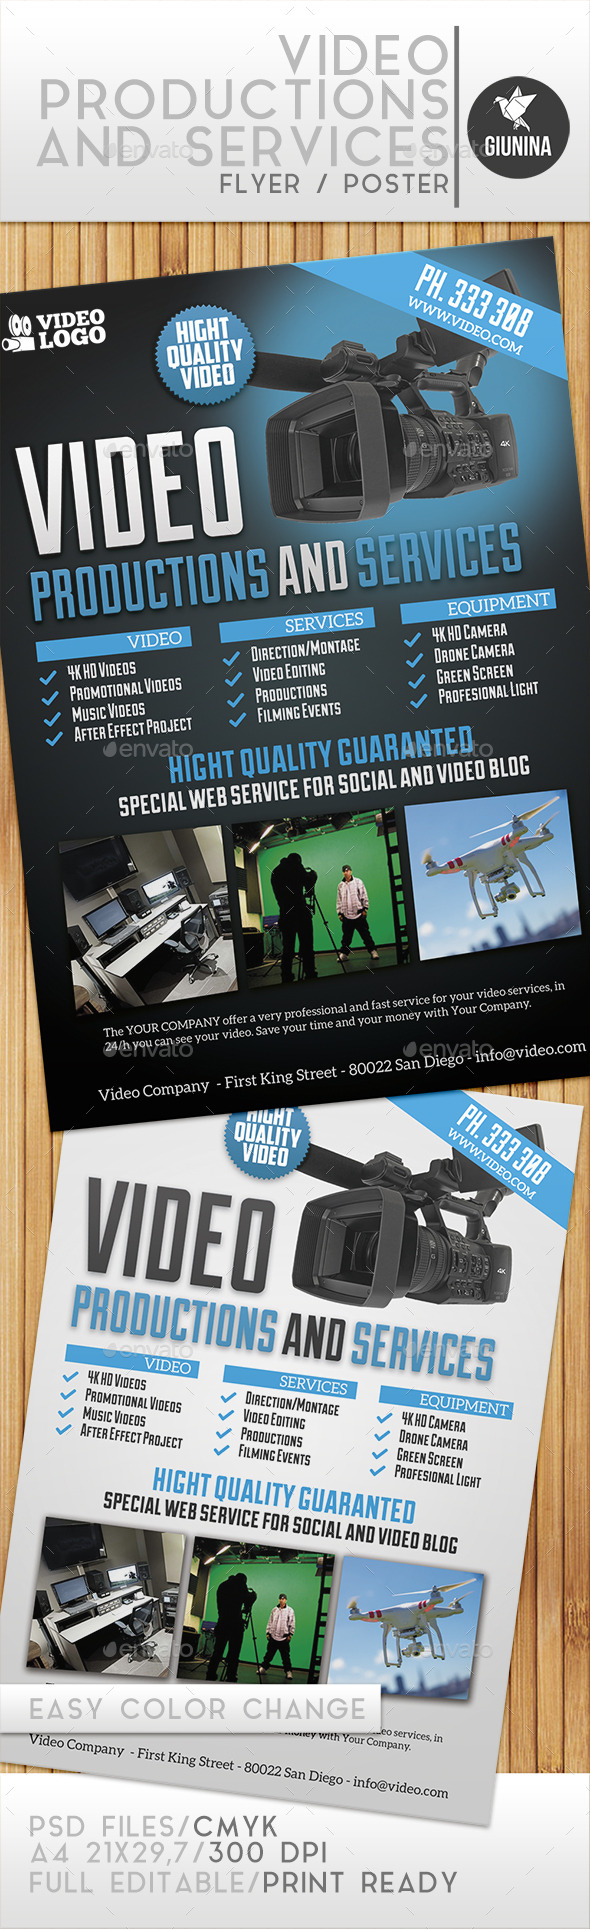 Video Production And Services Flyer/Poster